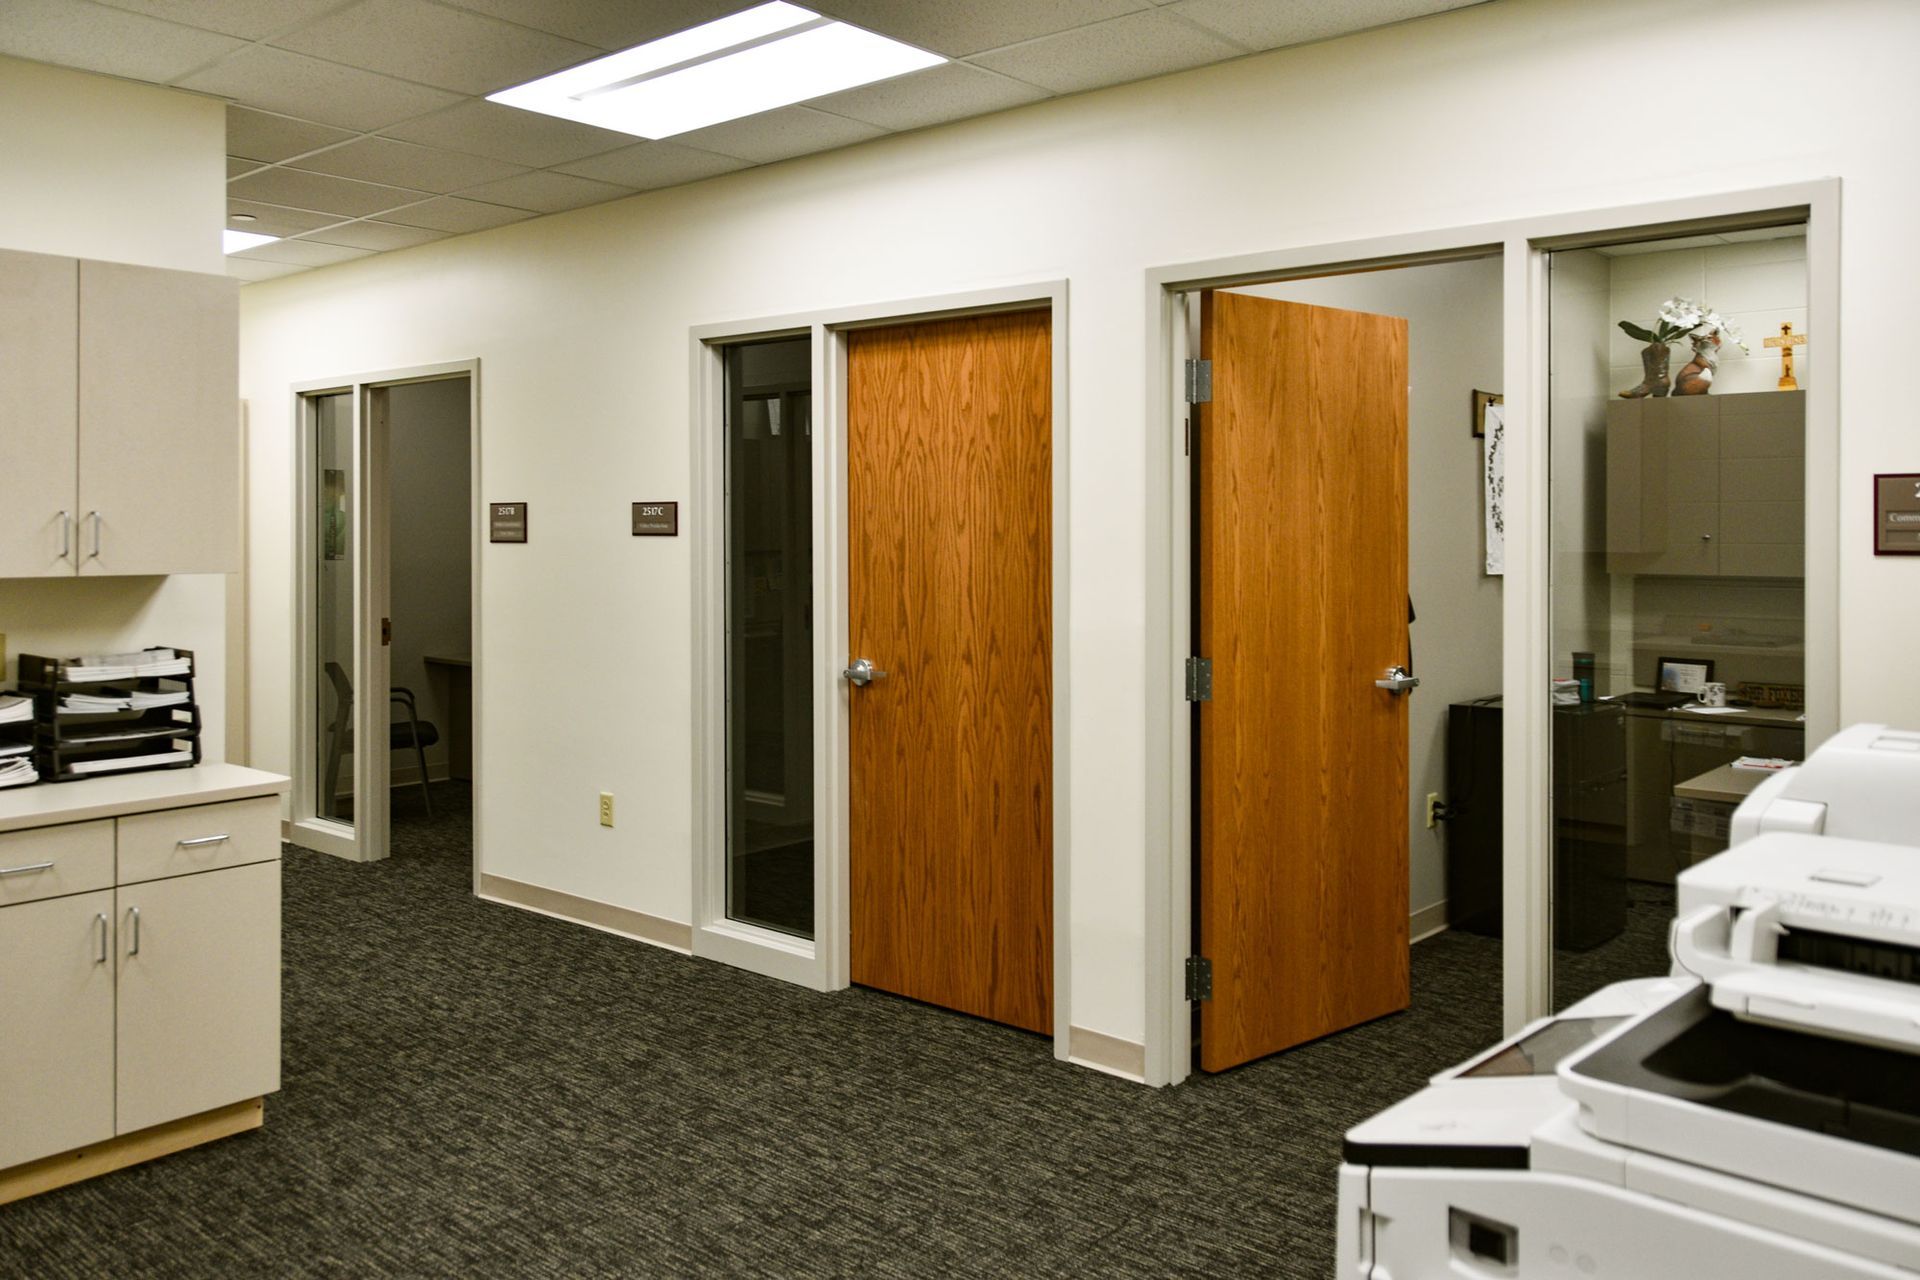 Three offices in the new Communications Suite along with the copier and counter and storage space